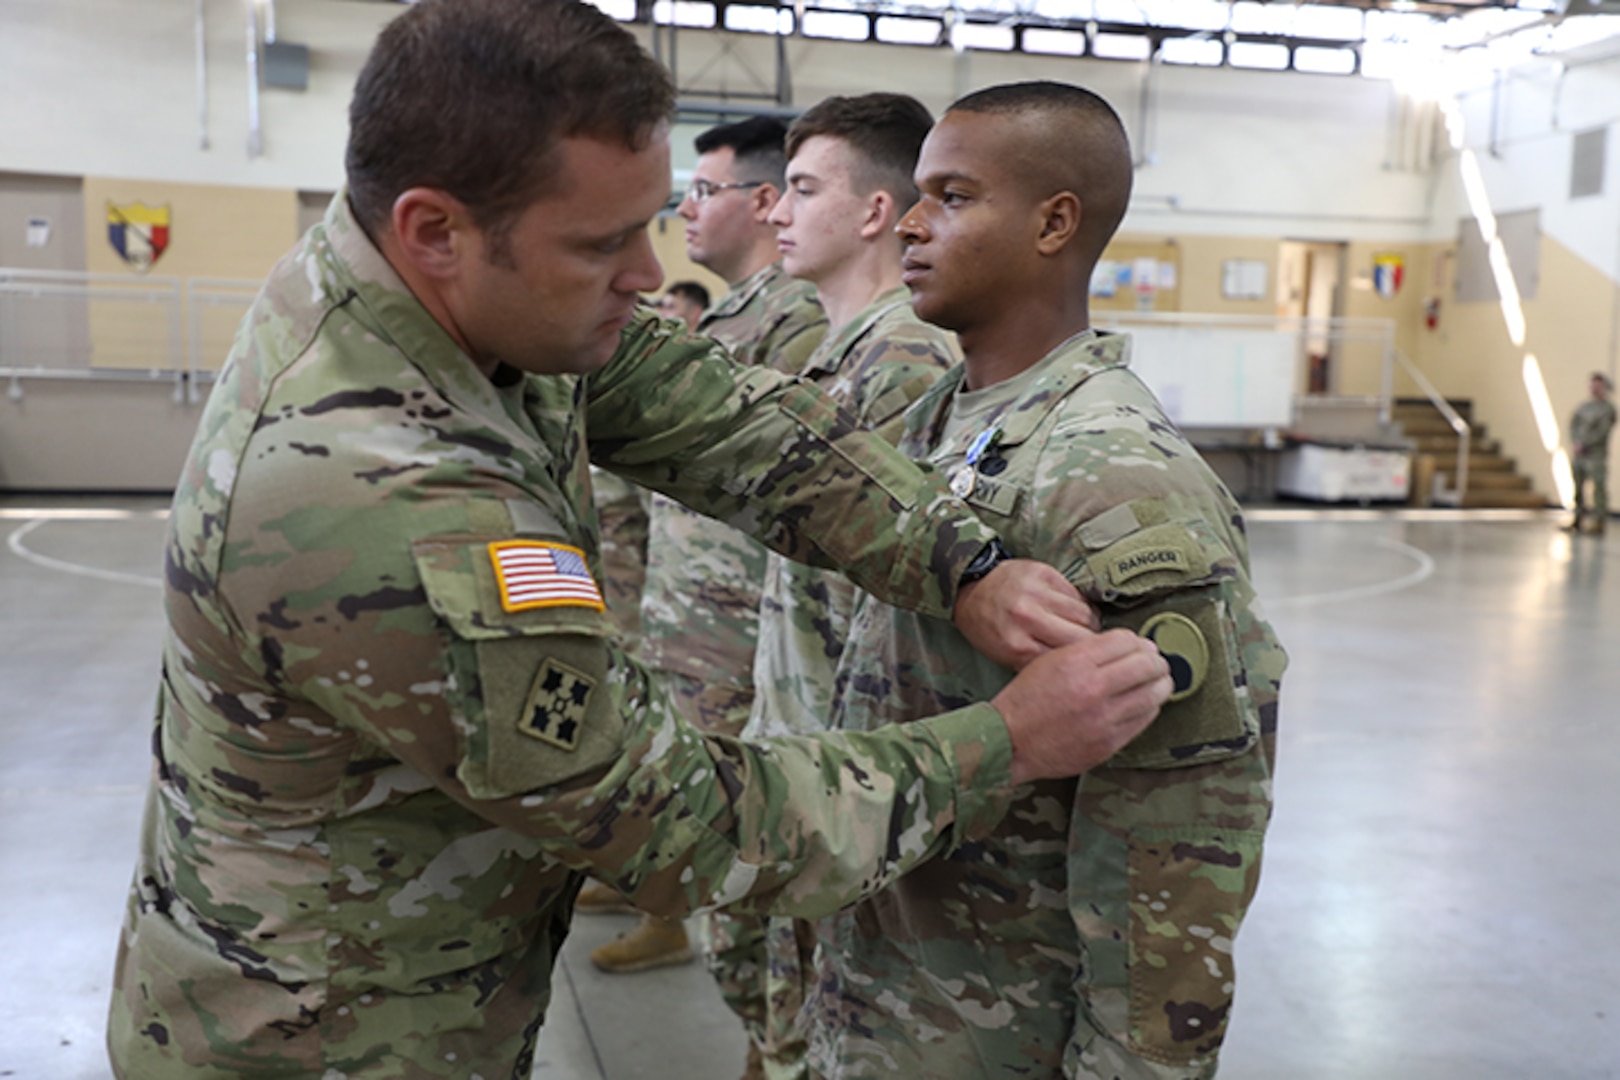 Pfc. Tristian Hines, of Somerset, Ky., who will be joining the 1-149th Infantry, gets his unit patch from Sgt. 1st Class Anthony Williamson, readiness NCO of the 1st Battalion, 149th Infantry Brigade during First Formation July 21, 2022.